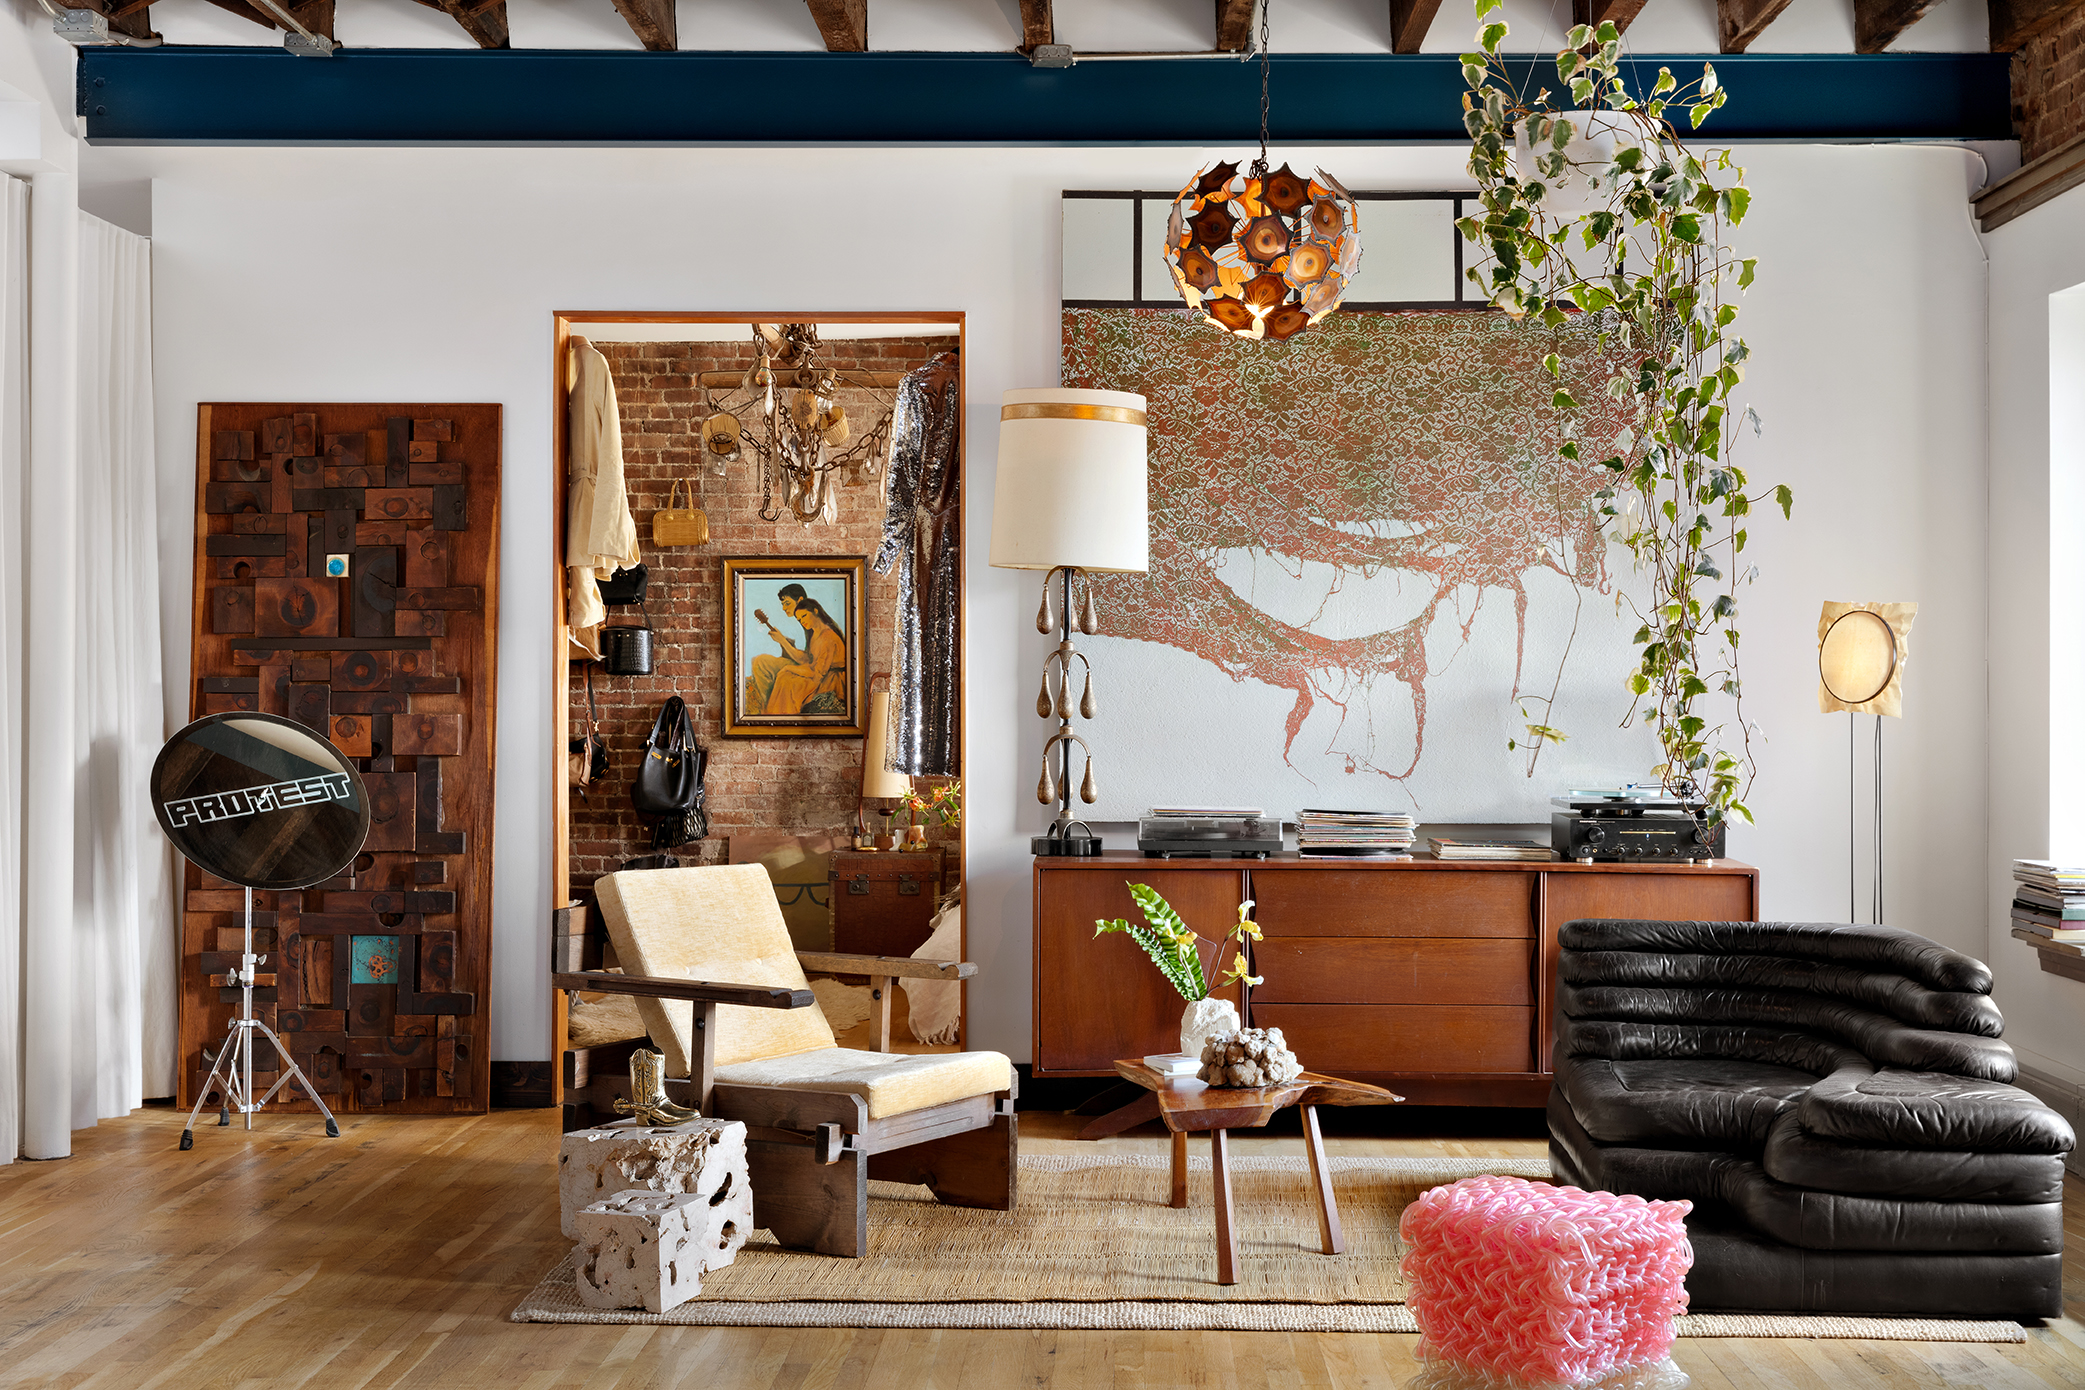 Erin Wasson's New York home. Wooden door by Doyle Lane, Ivan Navaro cymbal sculpture, pink stool by Kwangho Lee and art by Mark Flood above console.